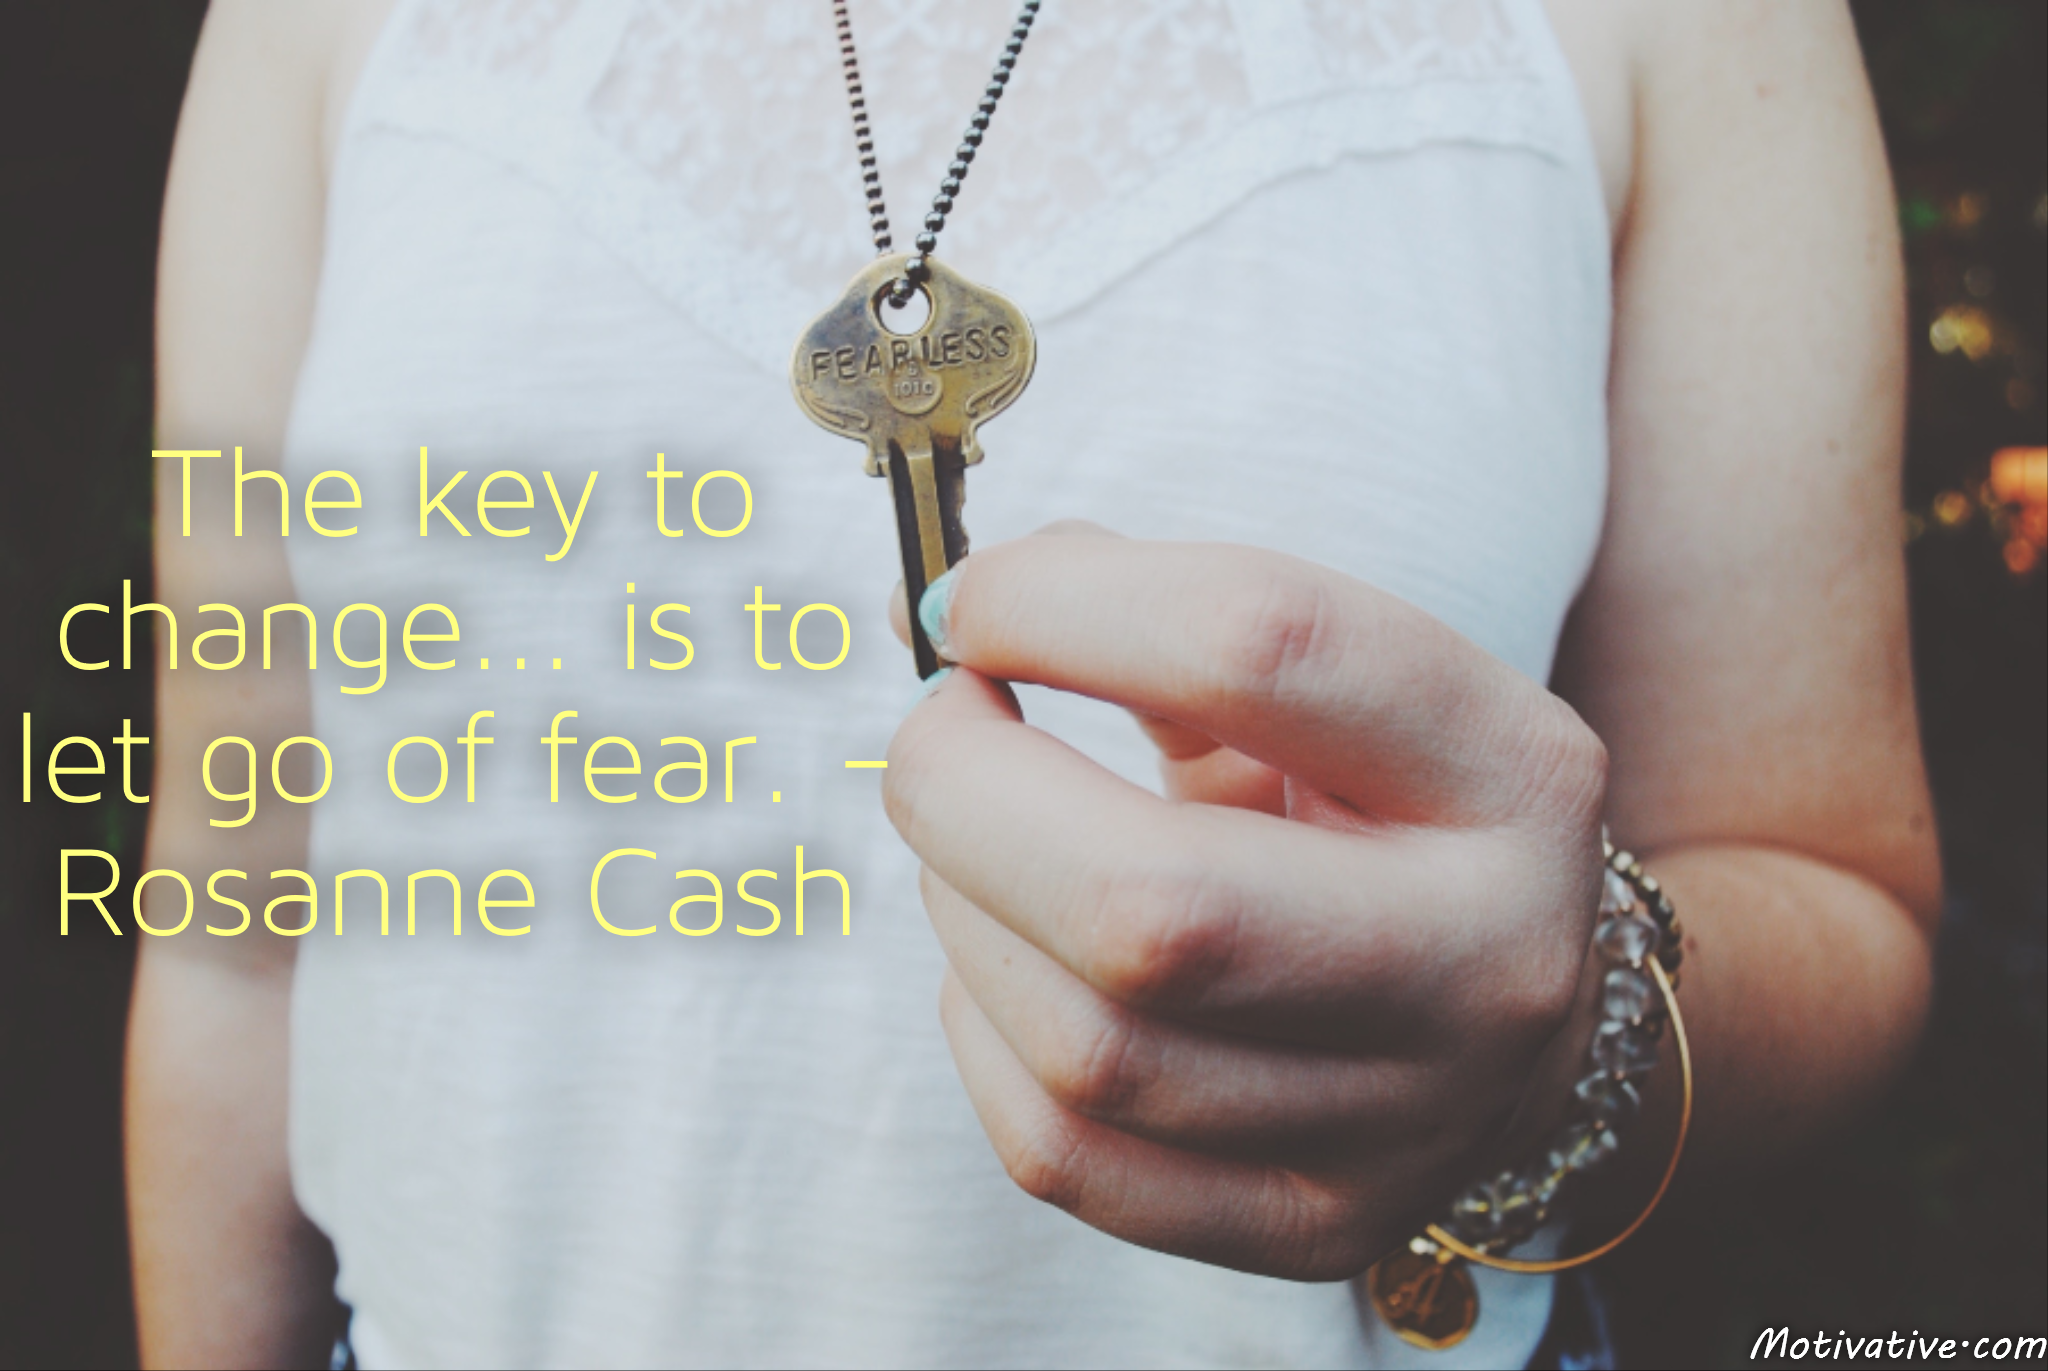 The key to change… is to let go of fear. – Rosanne Cash